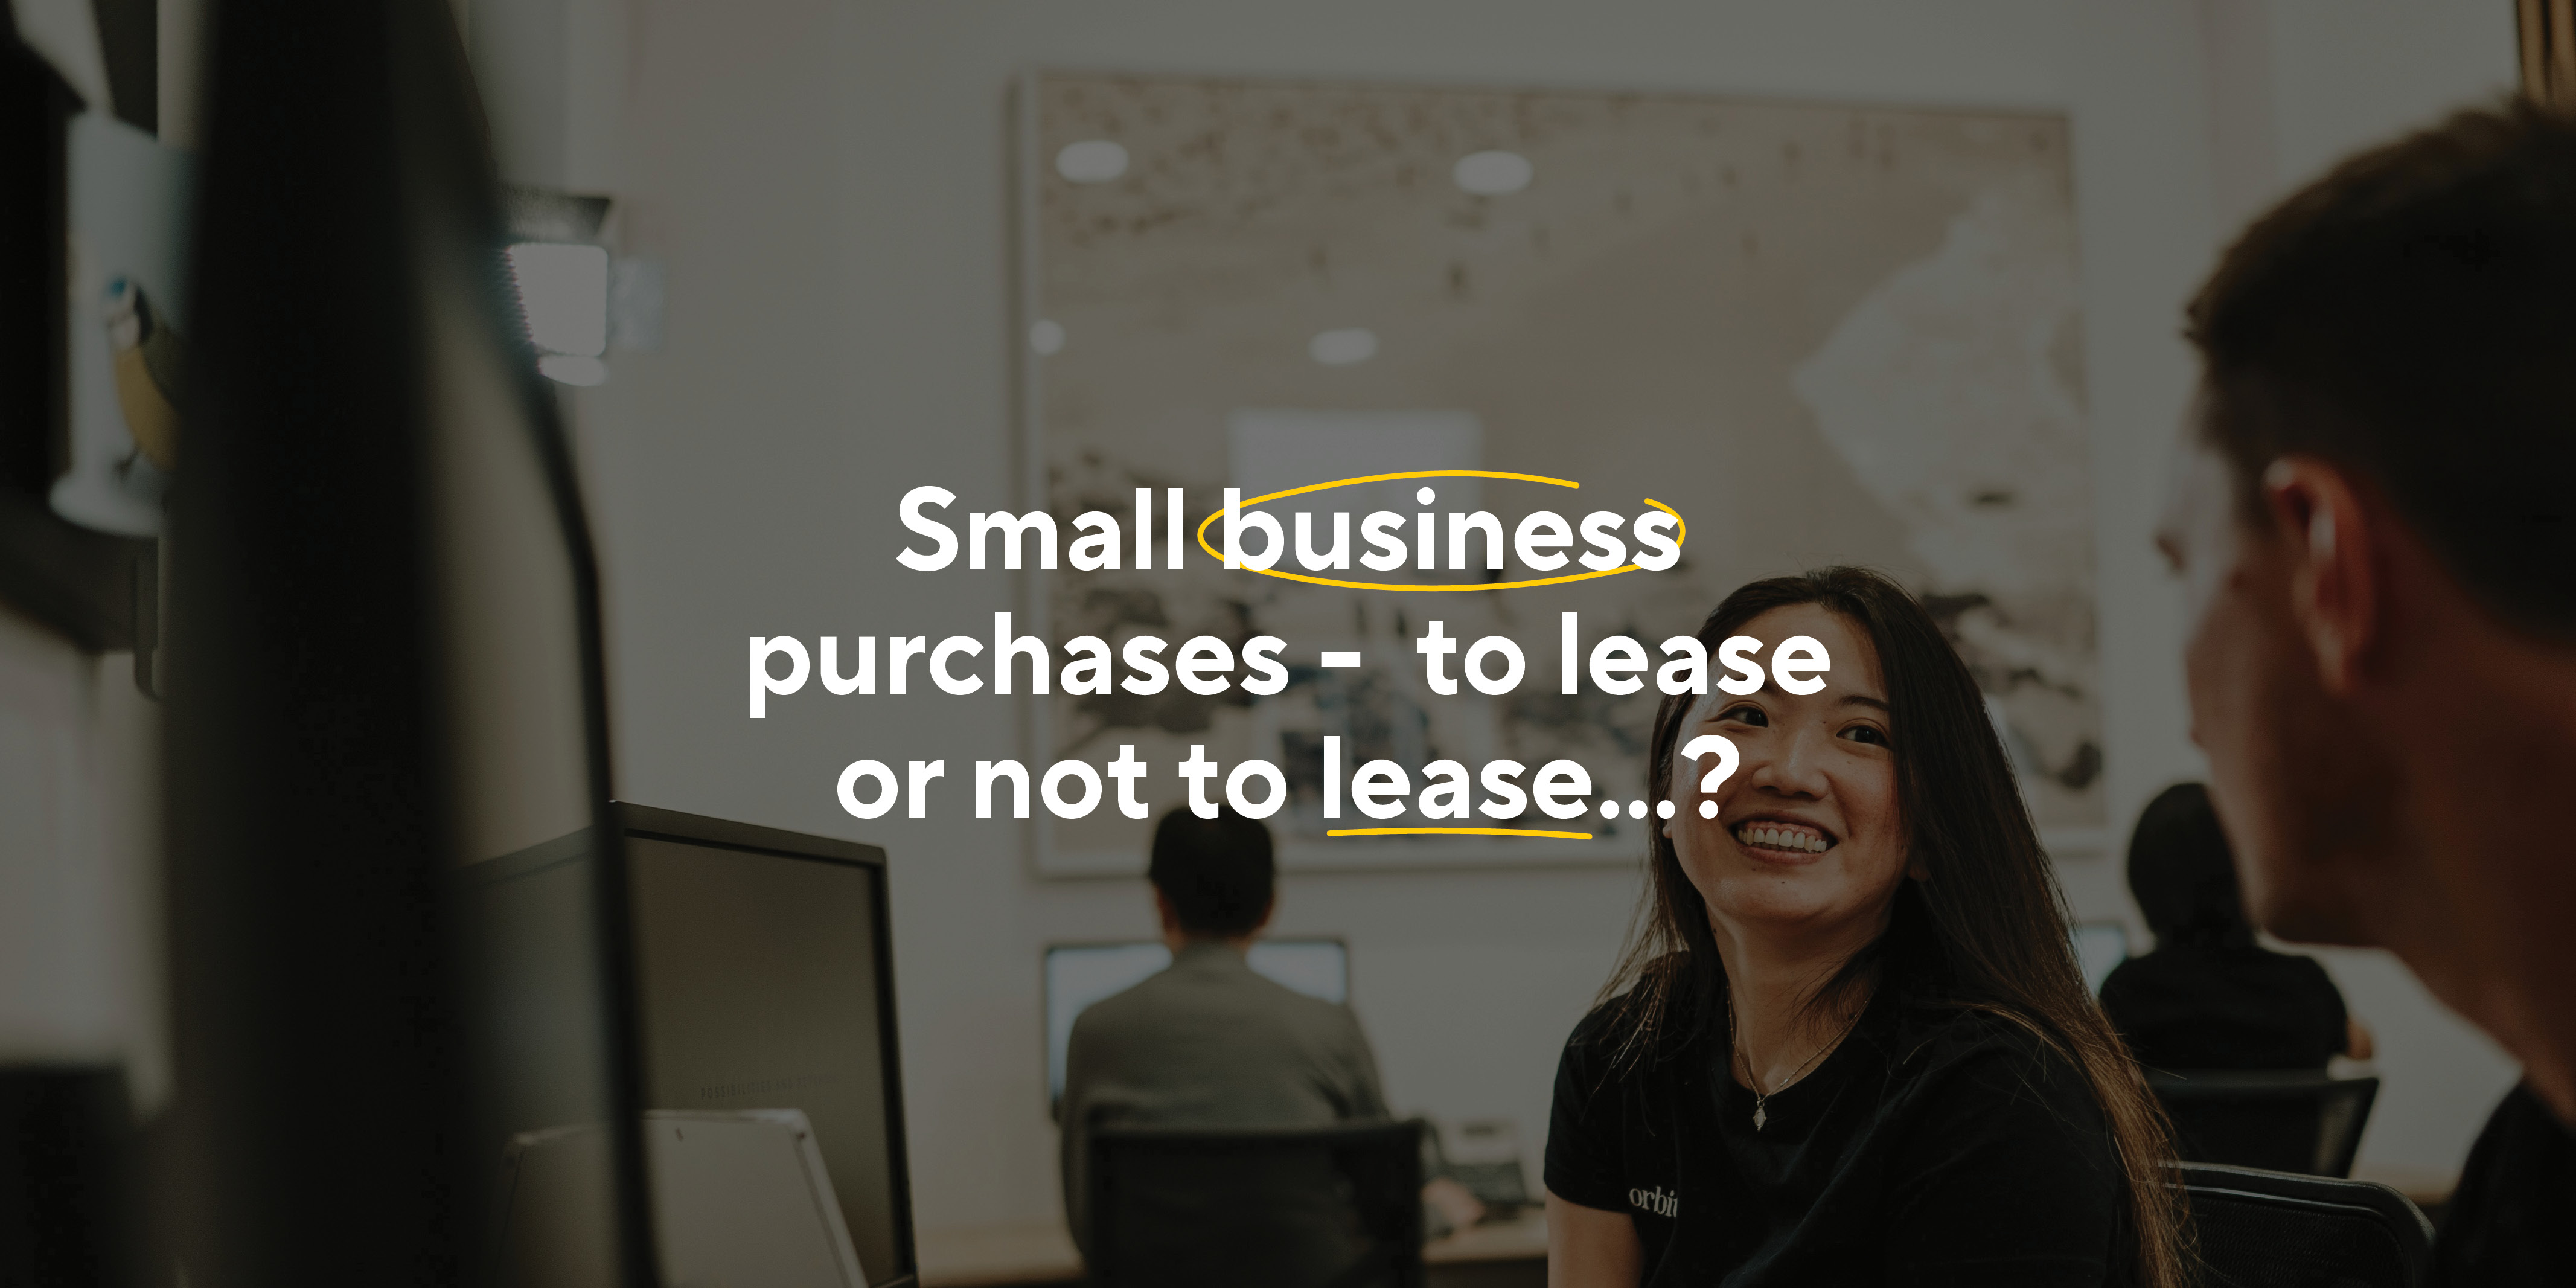 ydney's small business advisors are here to break it down if you should lease or buy your business assets